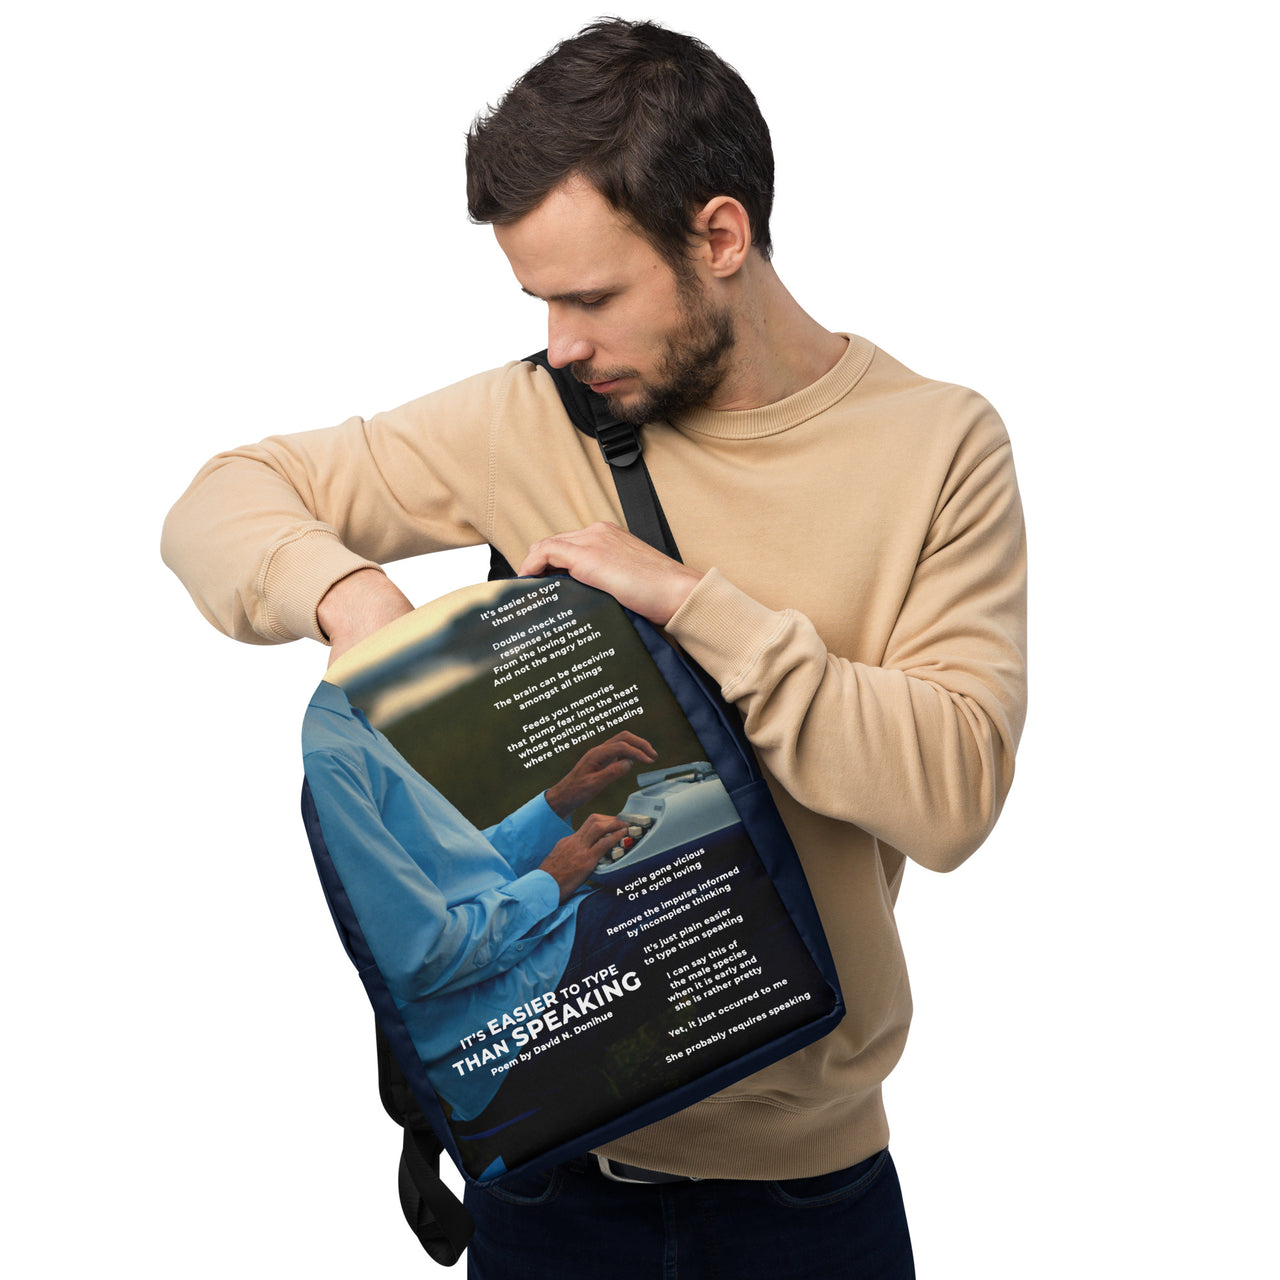 Poetry on a Backpack - IT'S EASIER TO TYPE THAN SPEAKING (Poem by David N. Donihue)